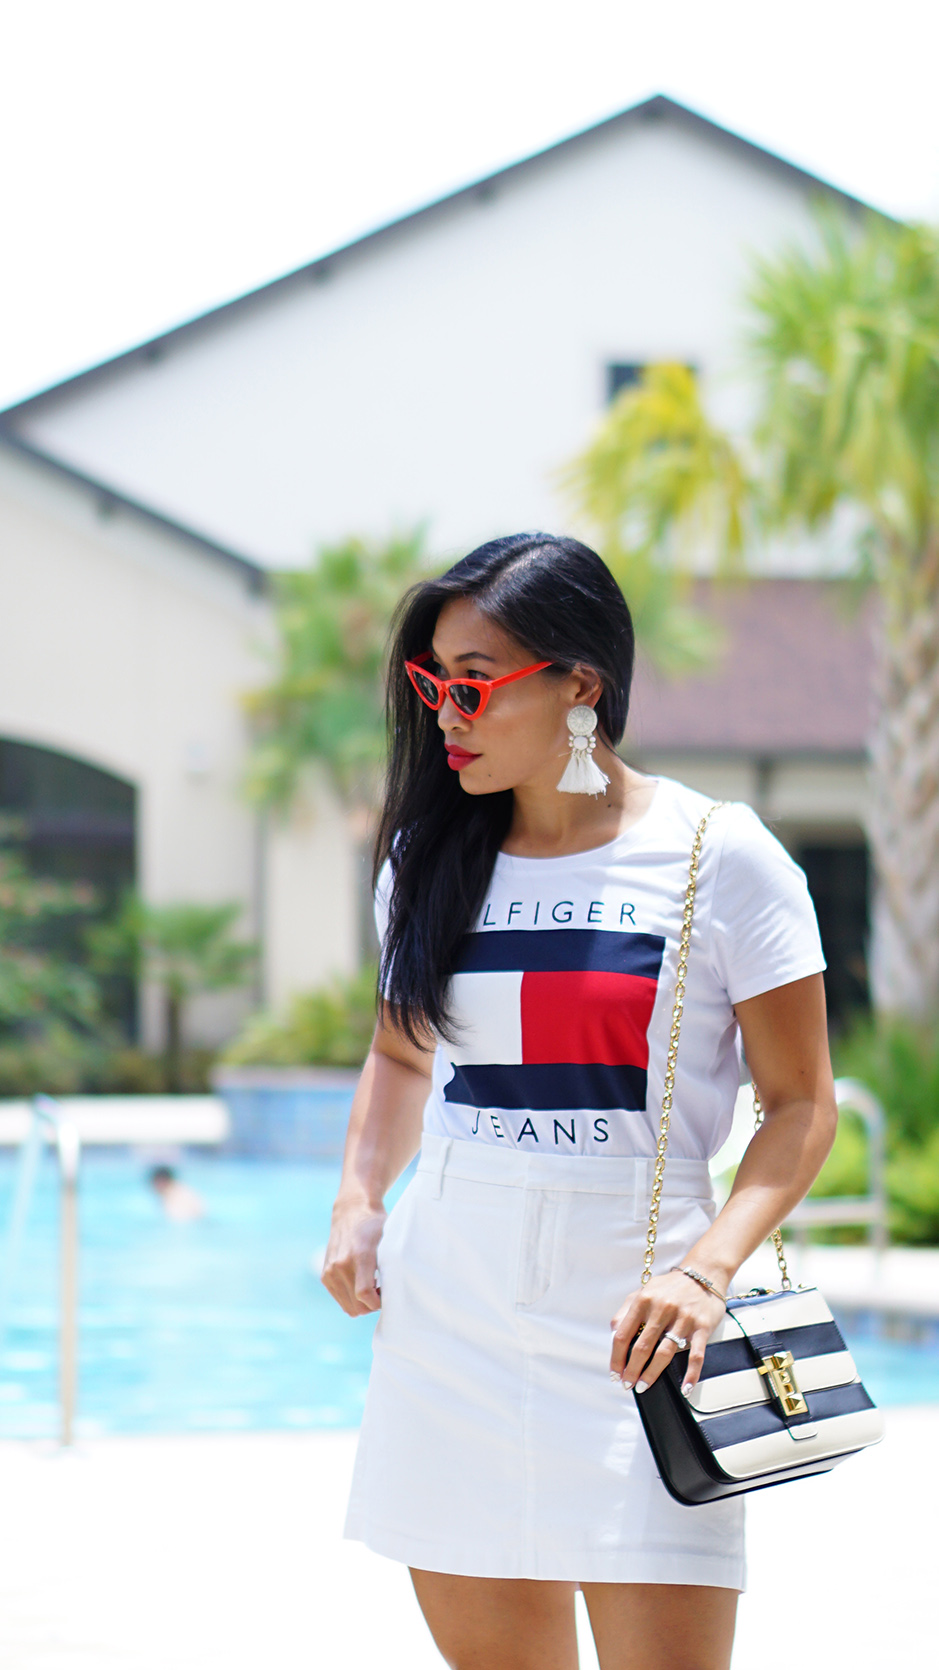 tommy hilfiger summer outfits